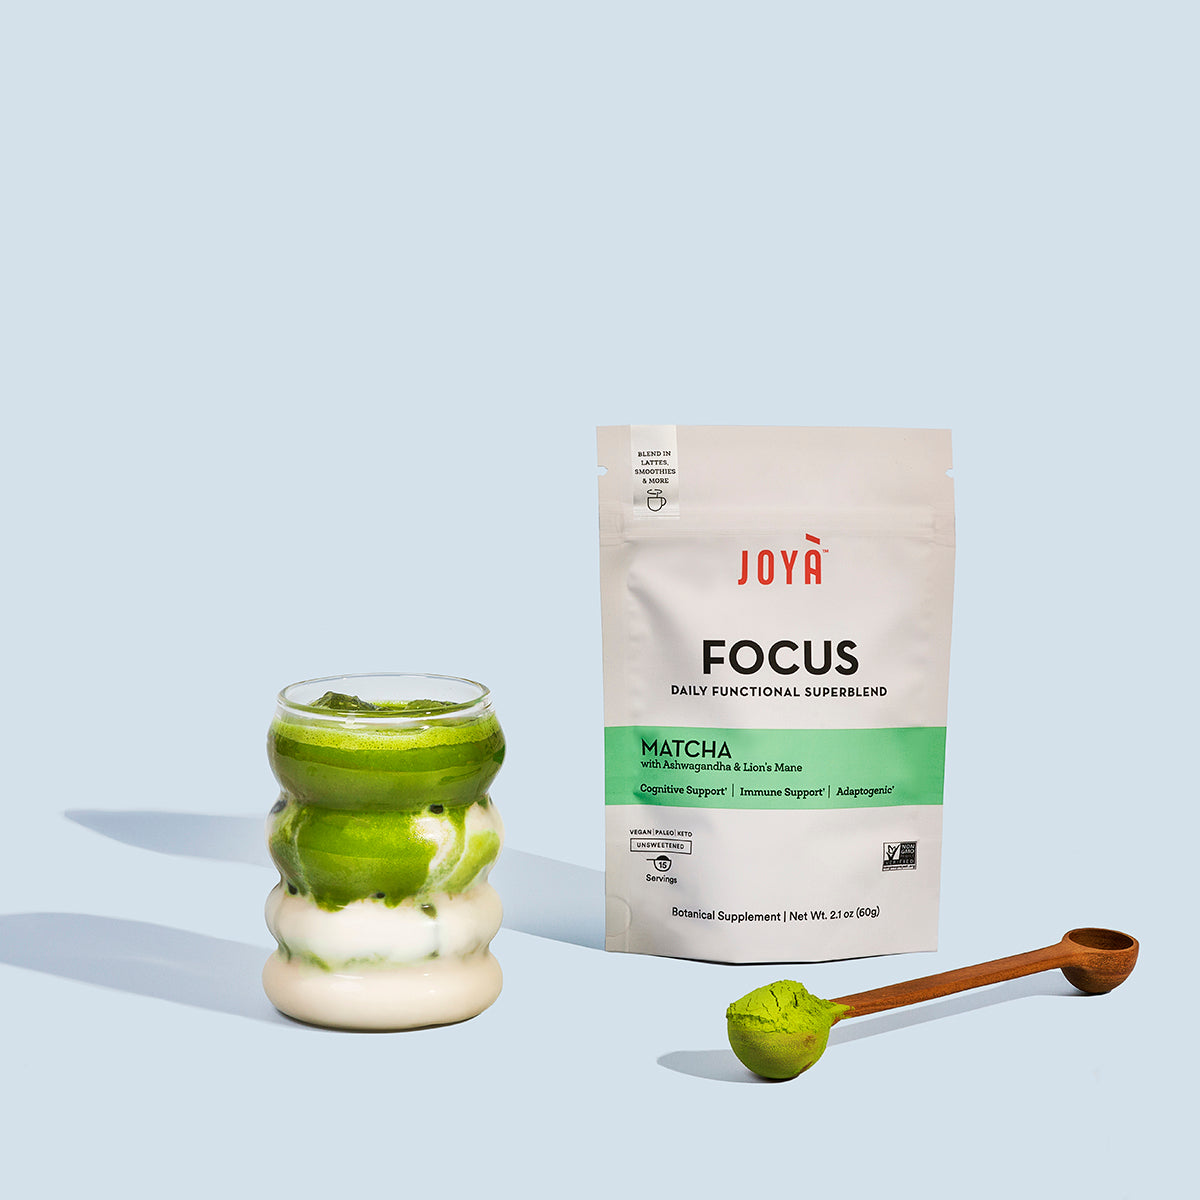 Focus Superblend 15-serving pouch beside a wooden spoon and an iced Focus matte latte in a clear glass